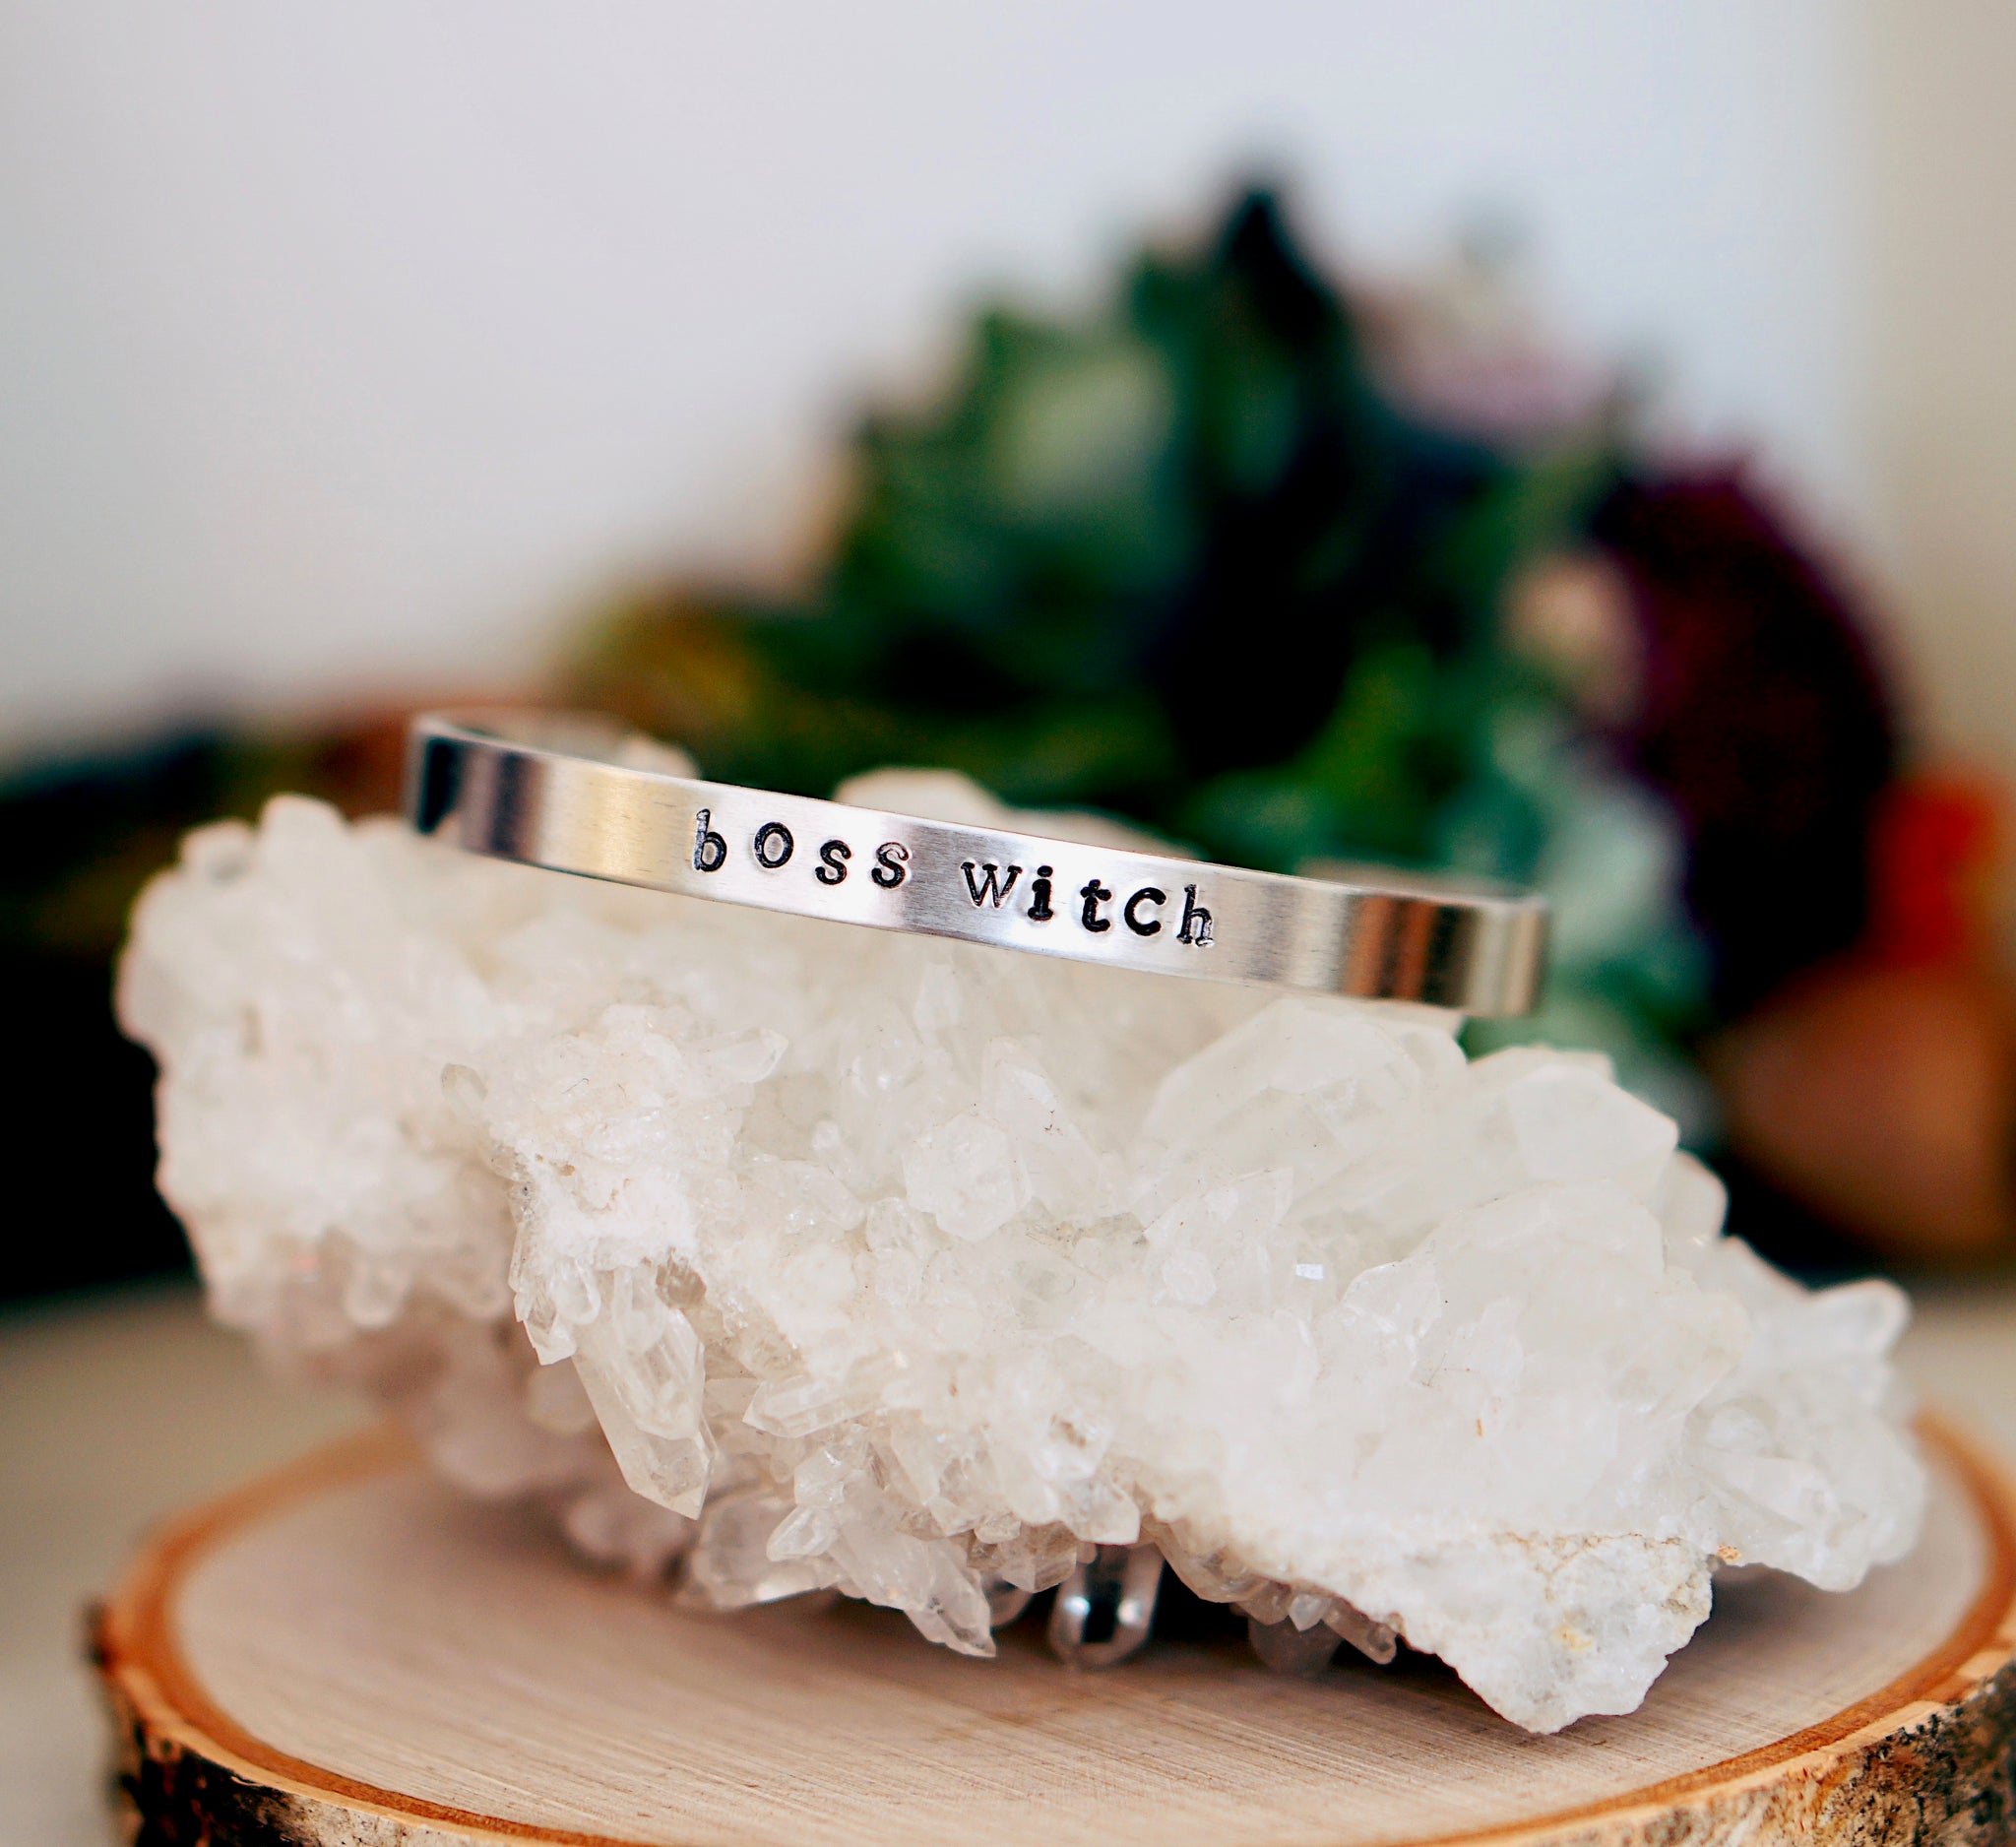 "Boss Witch" Stamped Bangle